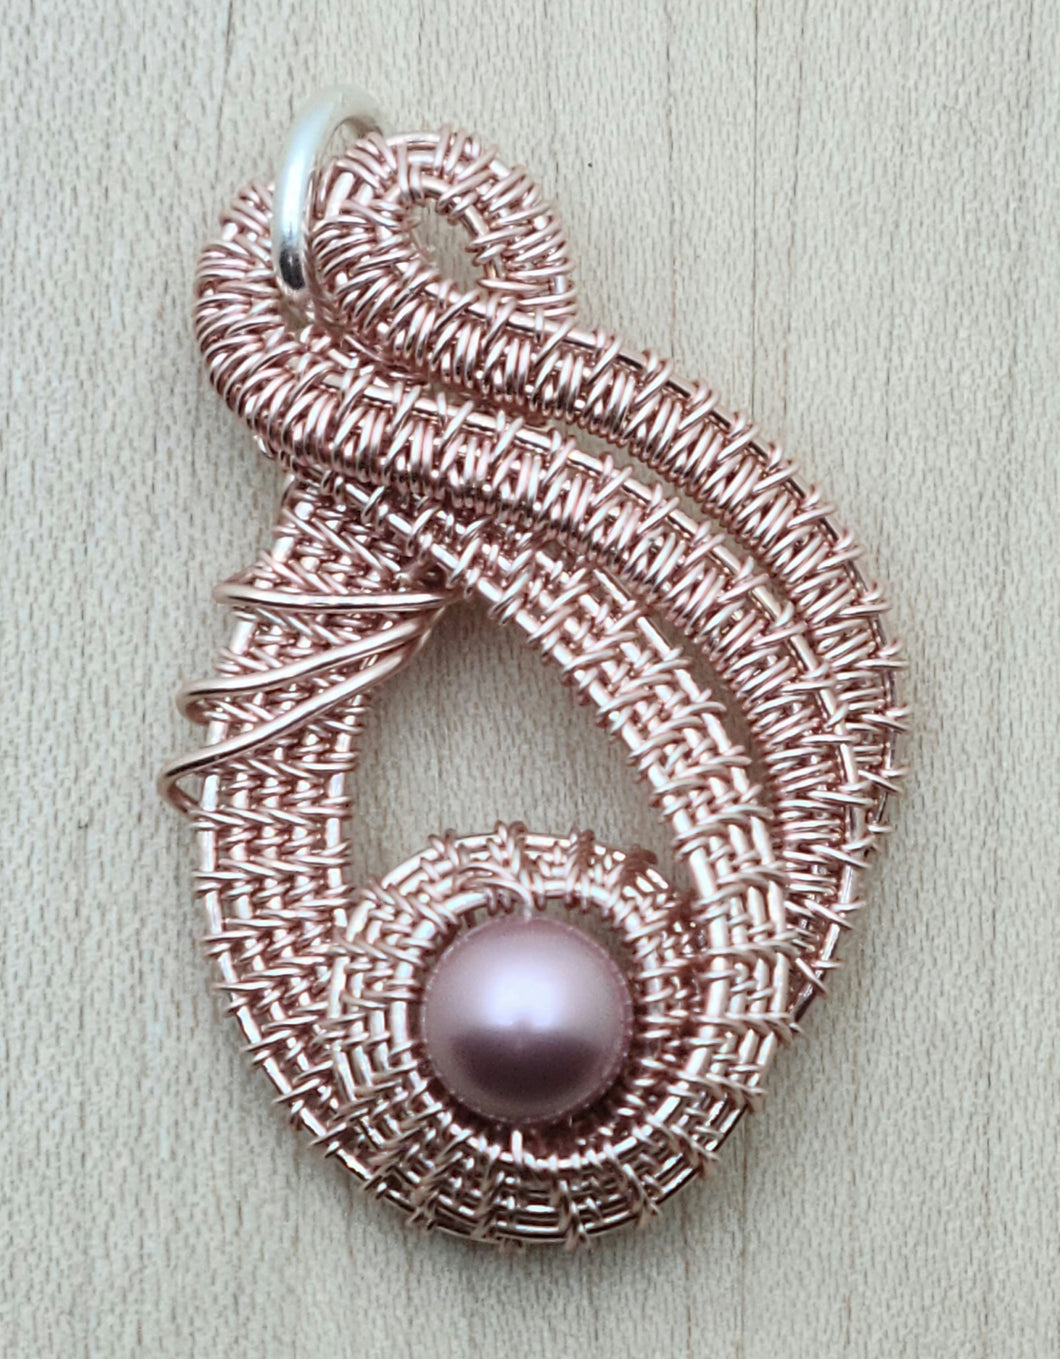 Expertly crafted with tarnish-resistant silver plating, this Woven Wire Rose Gold Pendant is a stunning accessory. The intricate woven wire design is accented with a crystal pearl in a soft powdered rose hue, adding elegance and sophistication to any outfit. Make a statement with this unique and beautiful pendant.